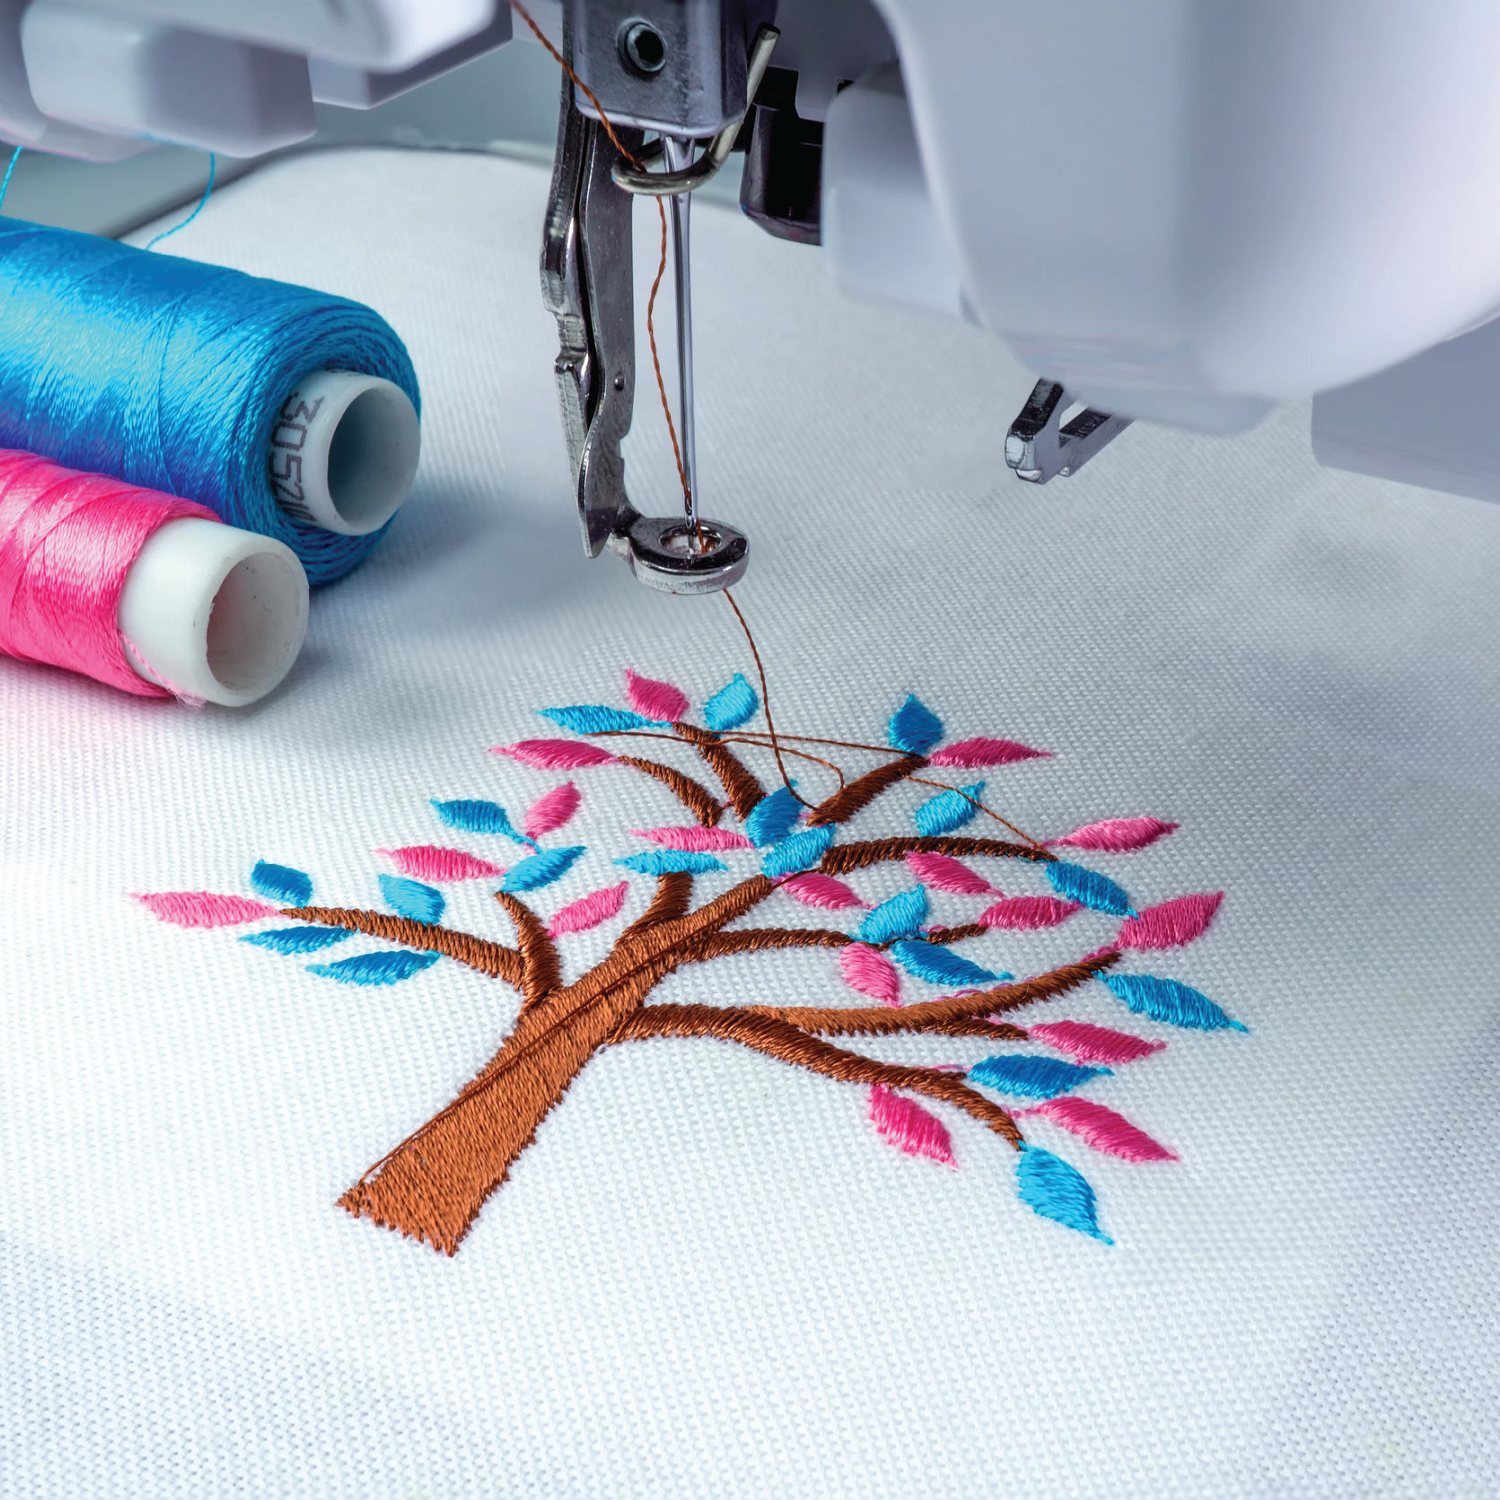 Embroidery Direct